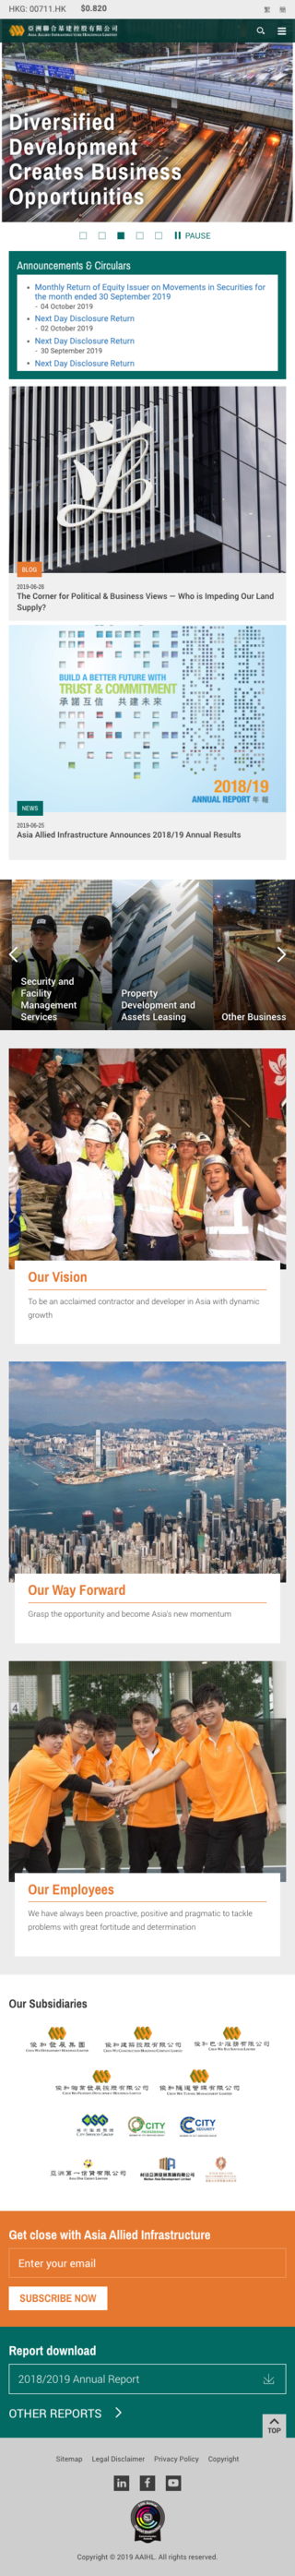 Asia Allied Infrastructure Holdings Limited website screenshot for mobile version 1 of 5